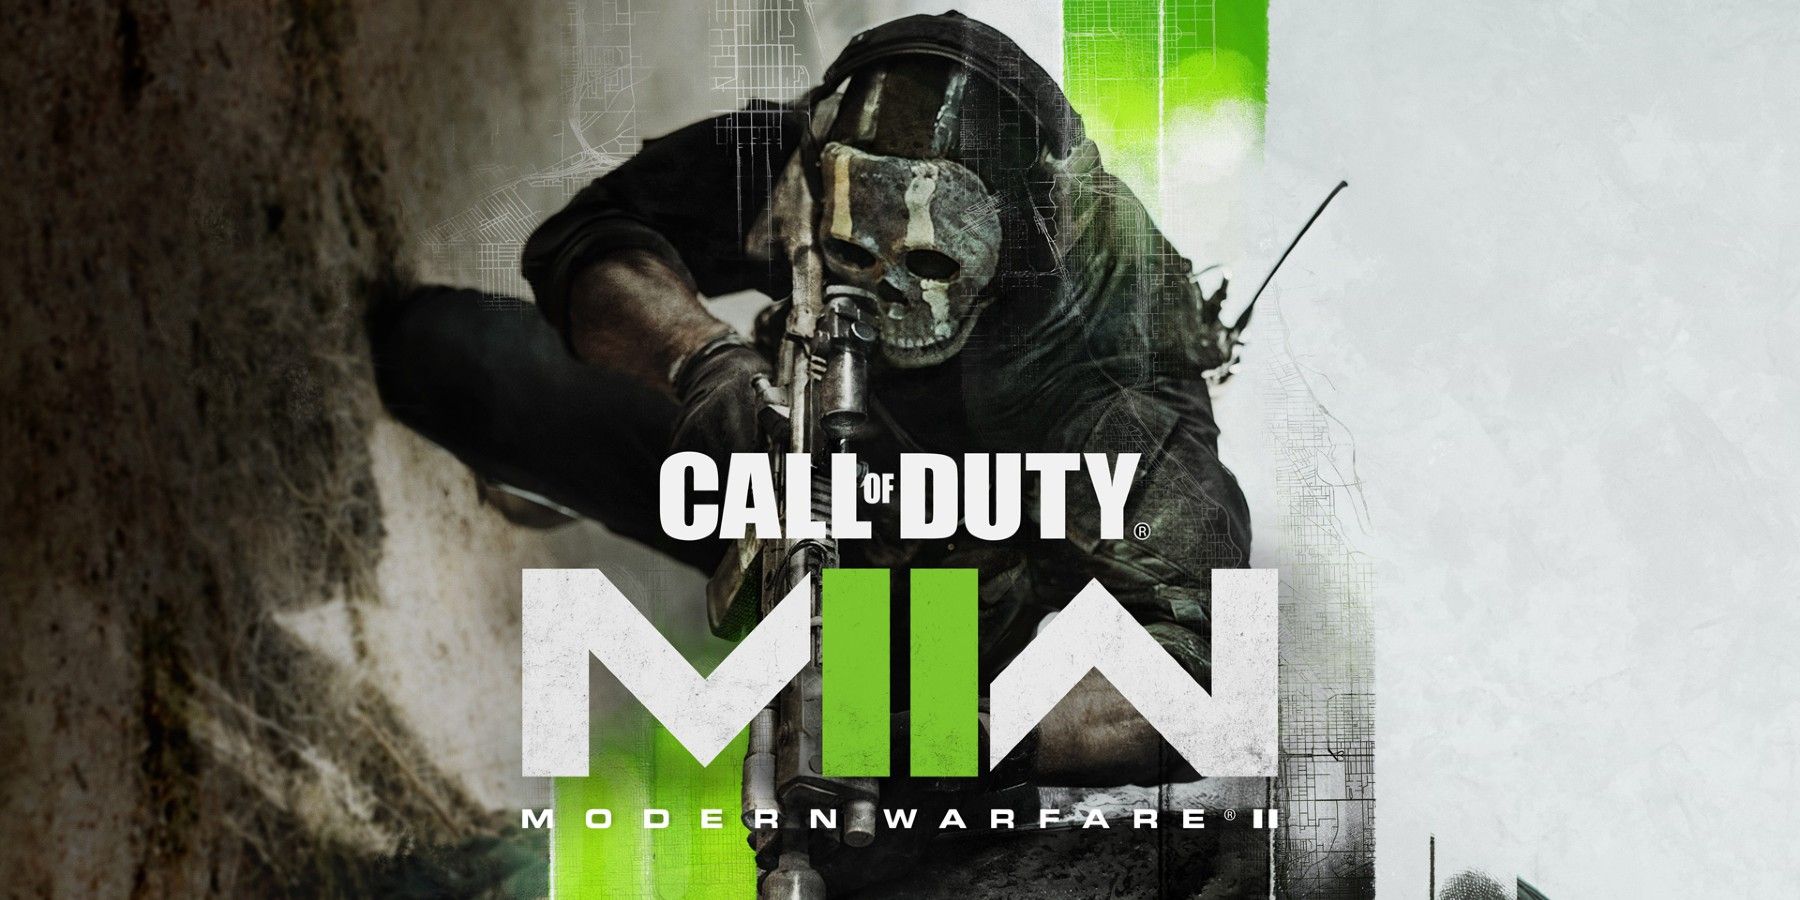 Call of Duty Modern Warfare 3 Releases A Live-Action Trailer